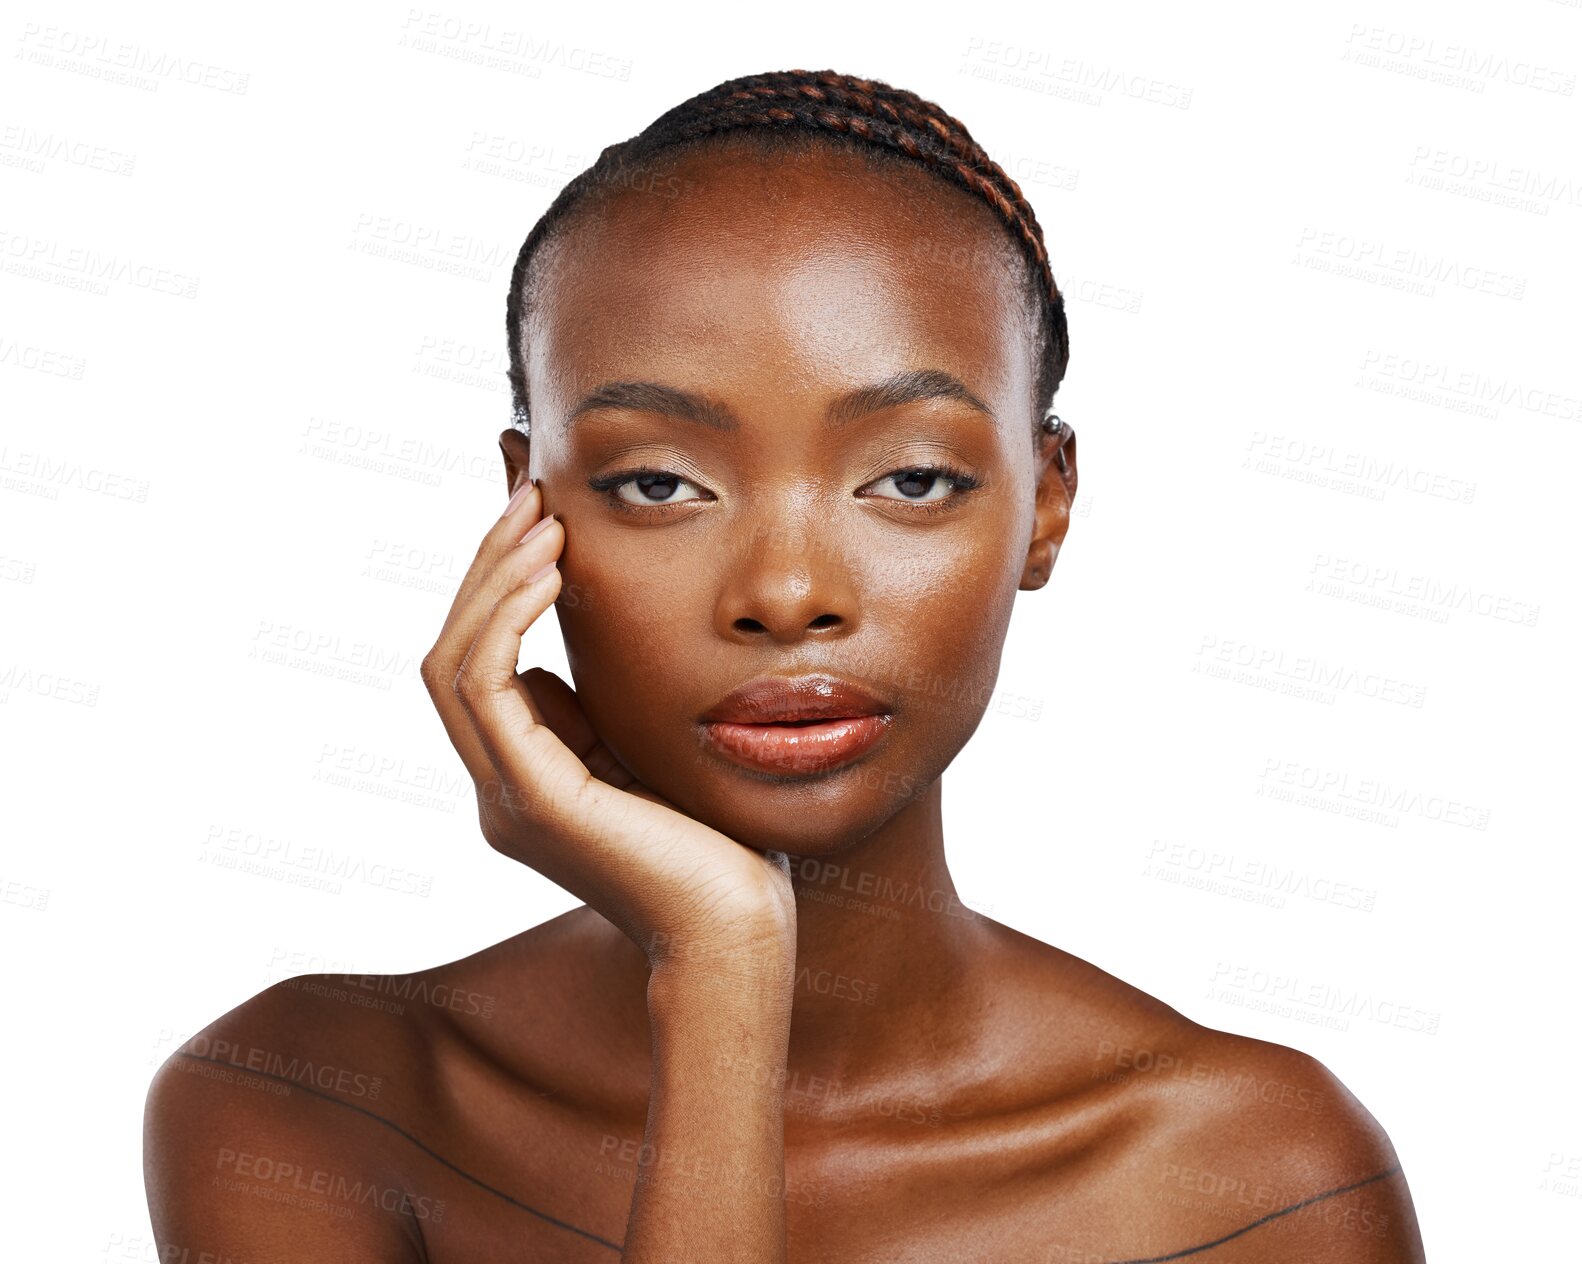 Buy stock photo Woman, portrait and serious for aesthetic skincare, natural beauty and dermatology isolated on transparent png background. African model touch face for hygiene, healthy results and collagen cosmetics